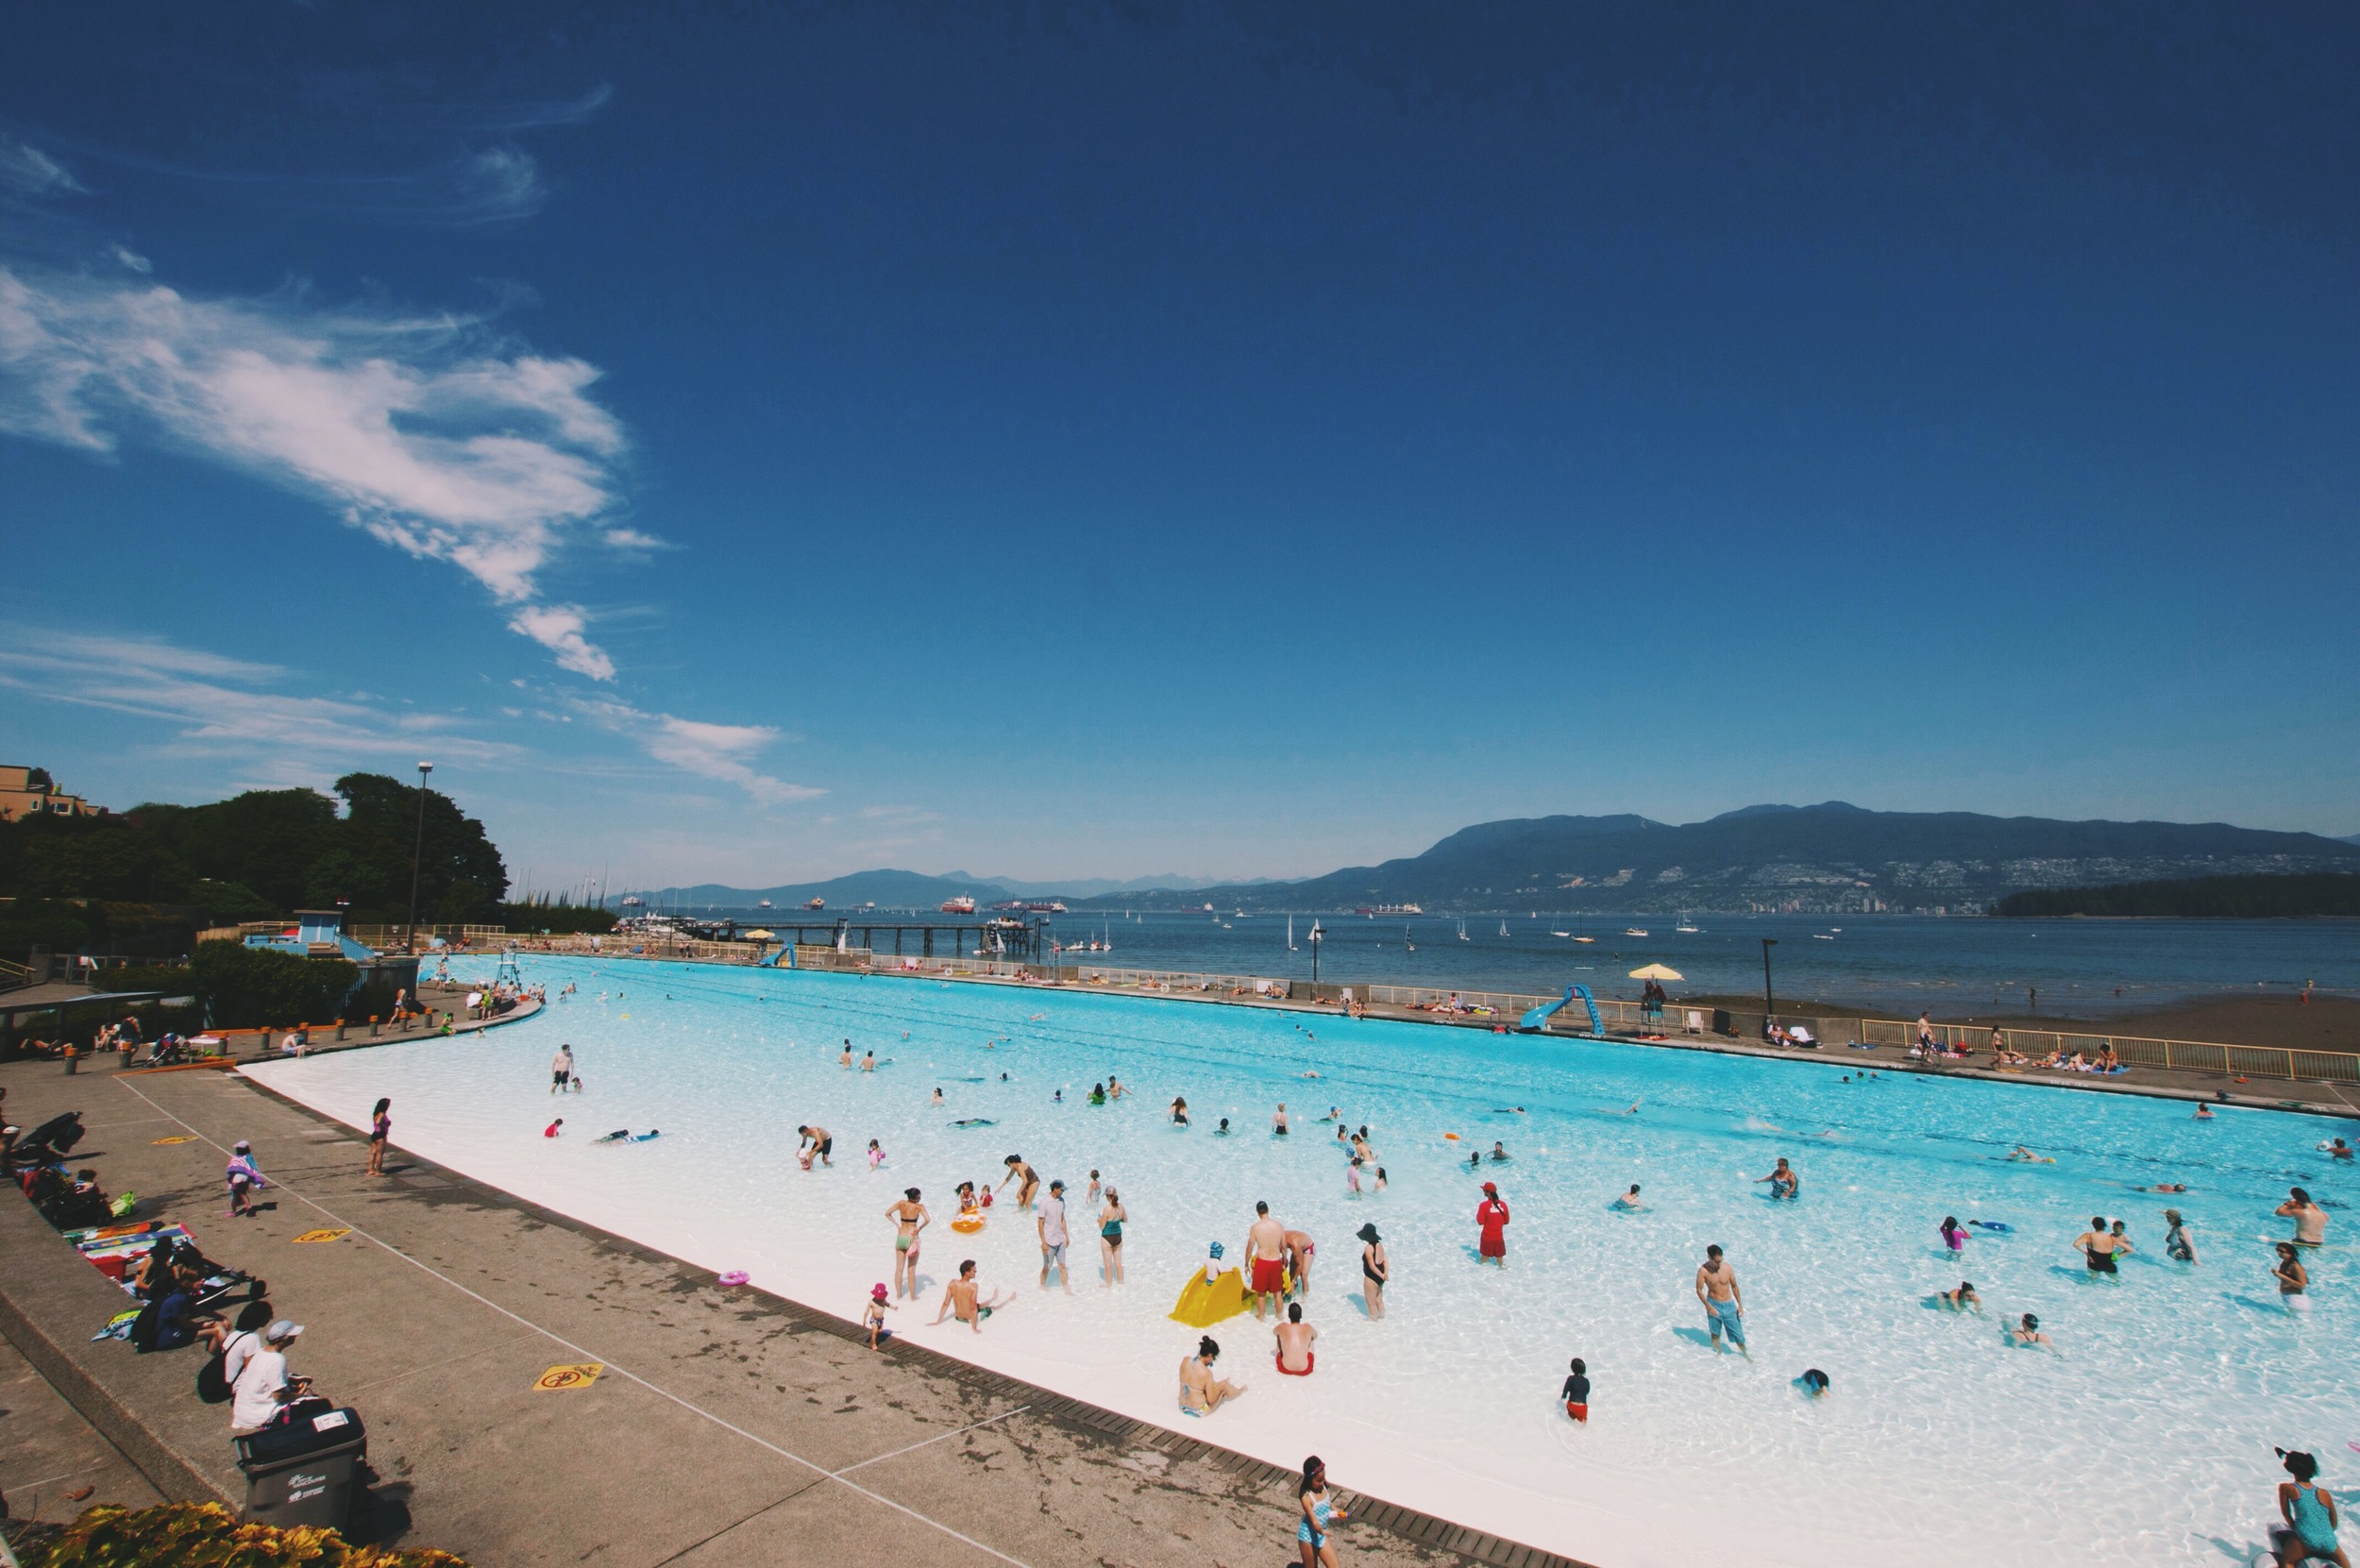 KITSILANO BEACH + POOL |The Local Visitor | A Guide to Vancouver from Locals